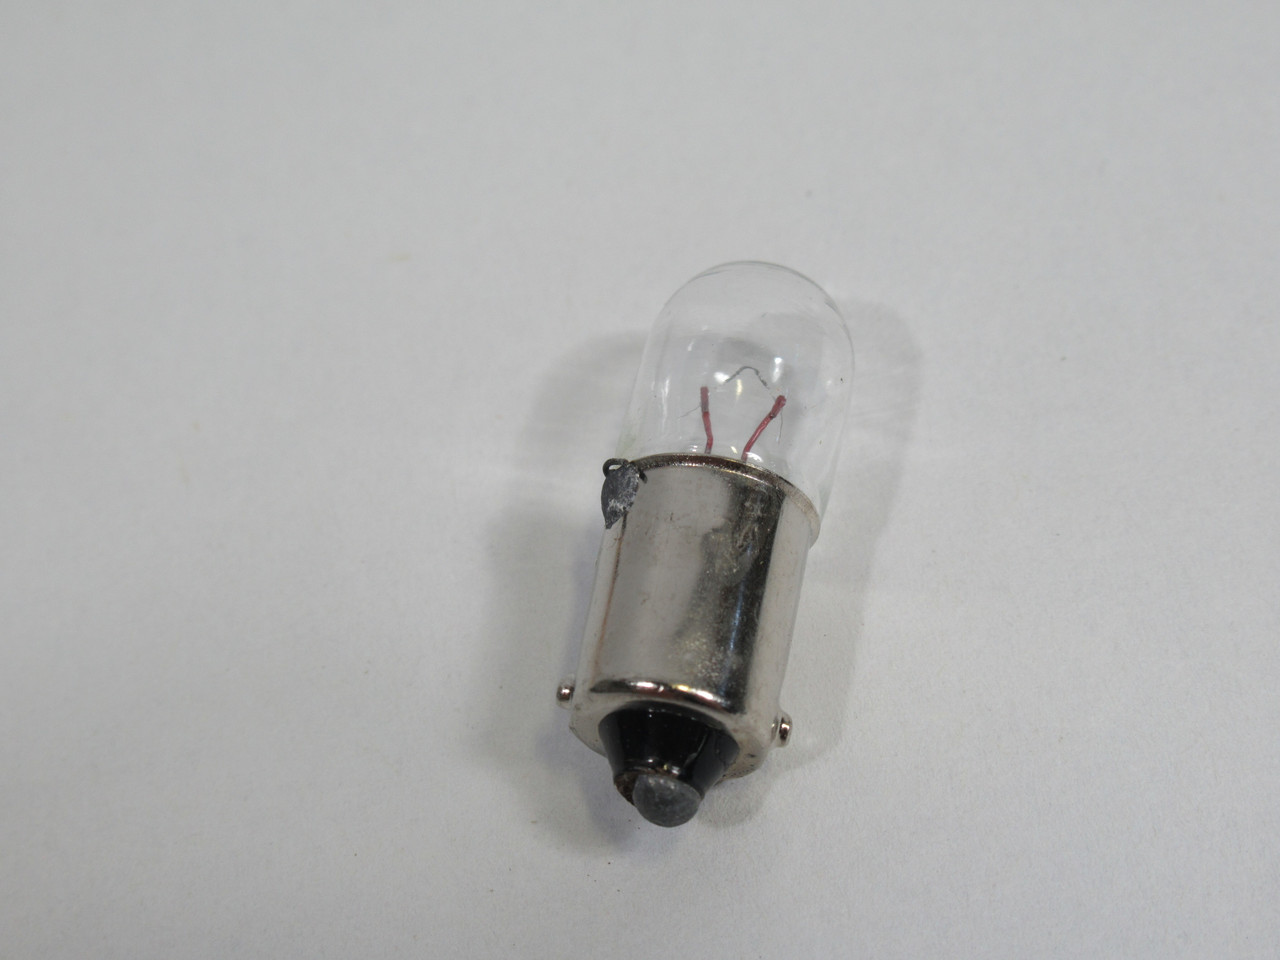 Symban 755 Miniature Lamps 6.3V 0.15A 6-Pack ! NEW !